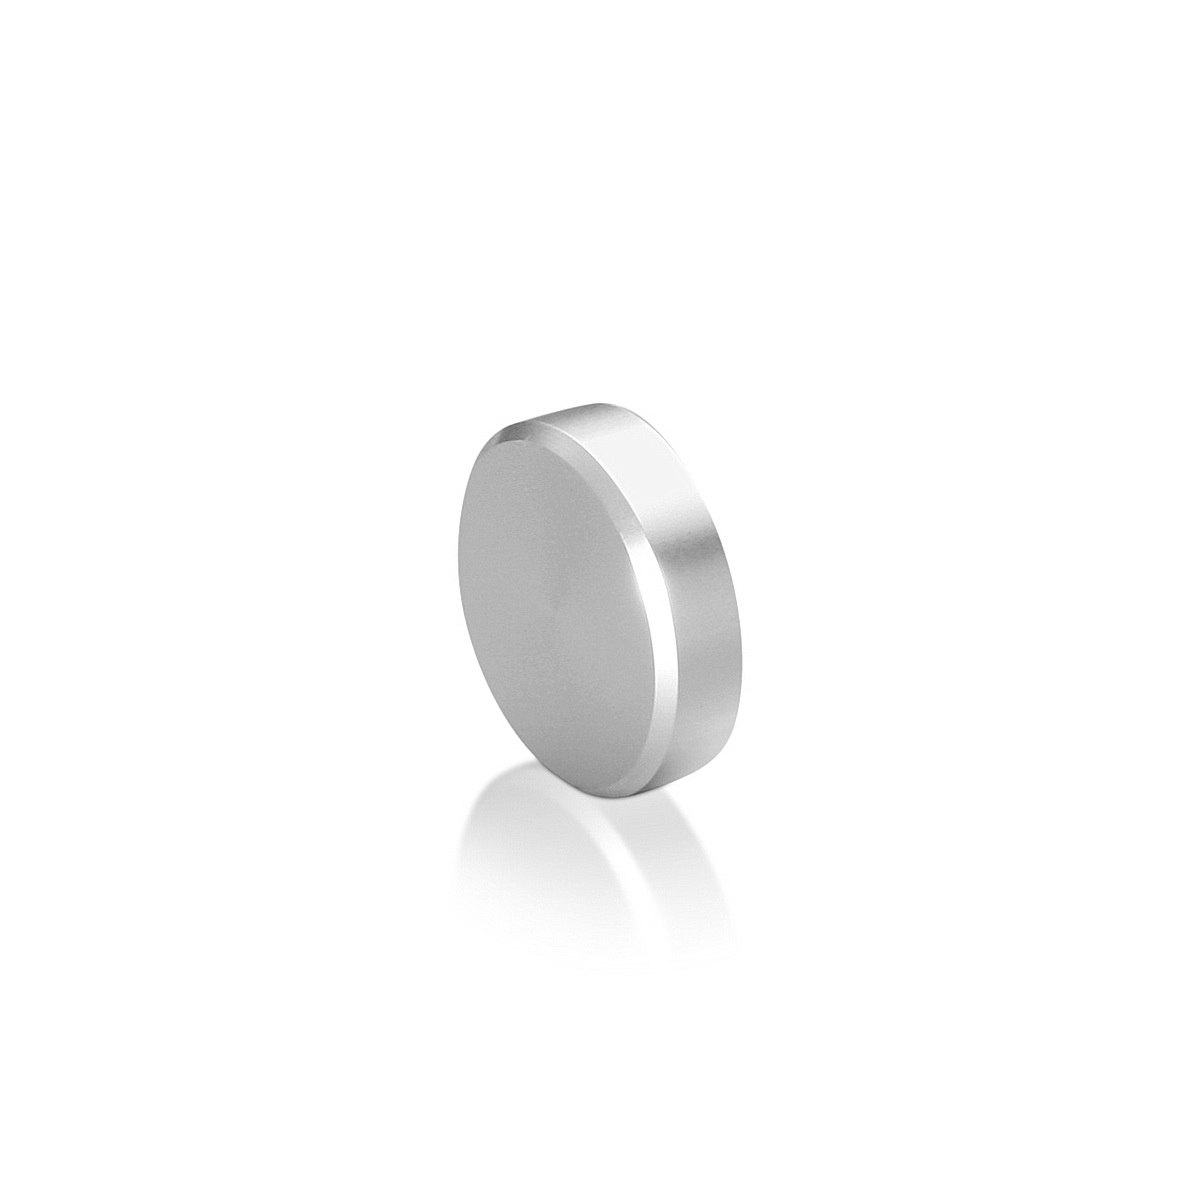 10-24 Threaded Caps Diameter: 1'', Height: 1/4'', Clear Anodized Aluminum [Required Material Hole Size: 7/32'']